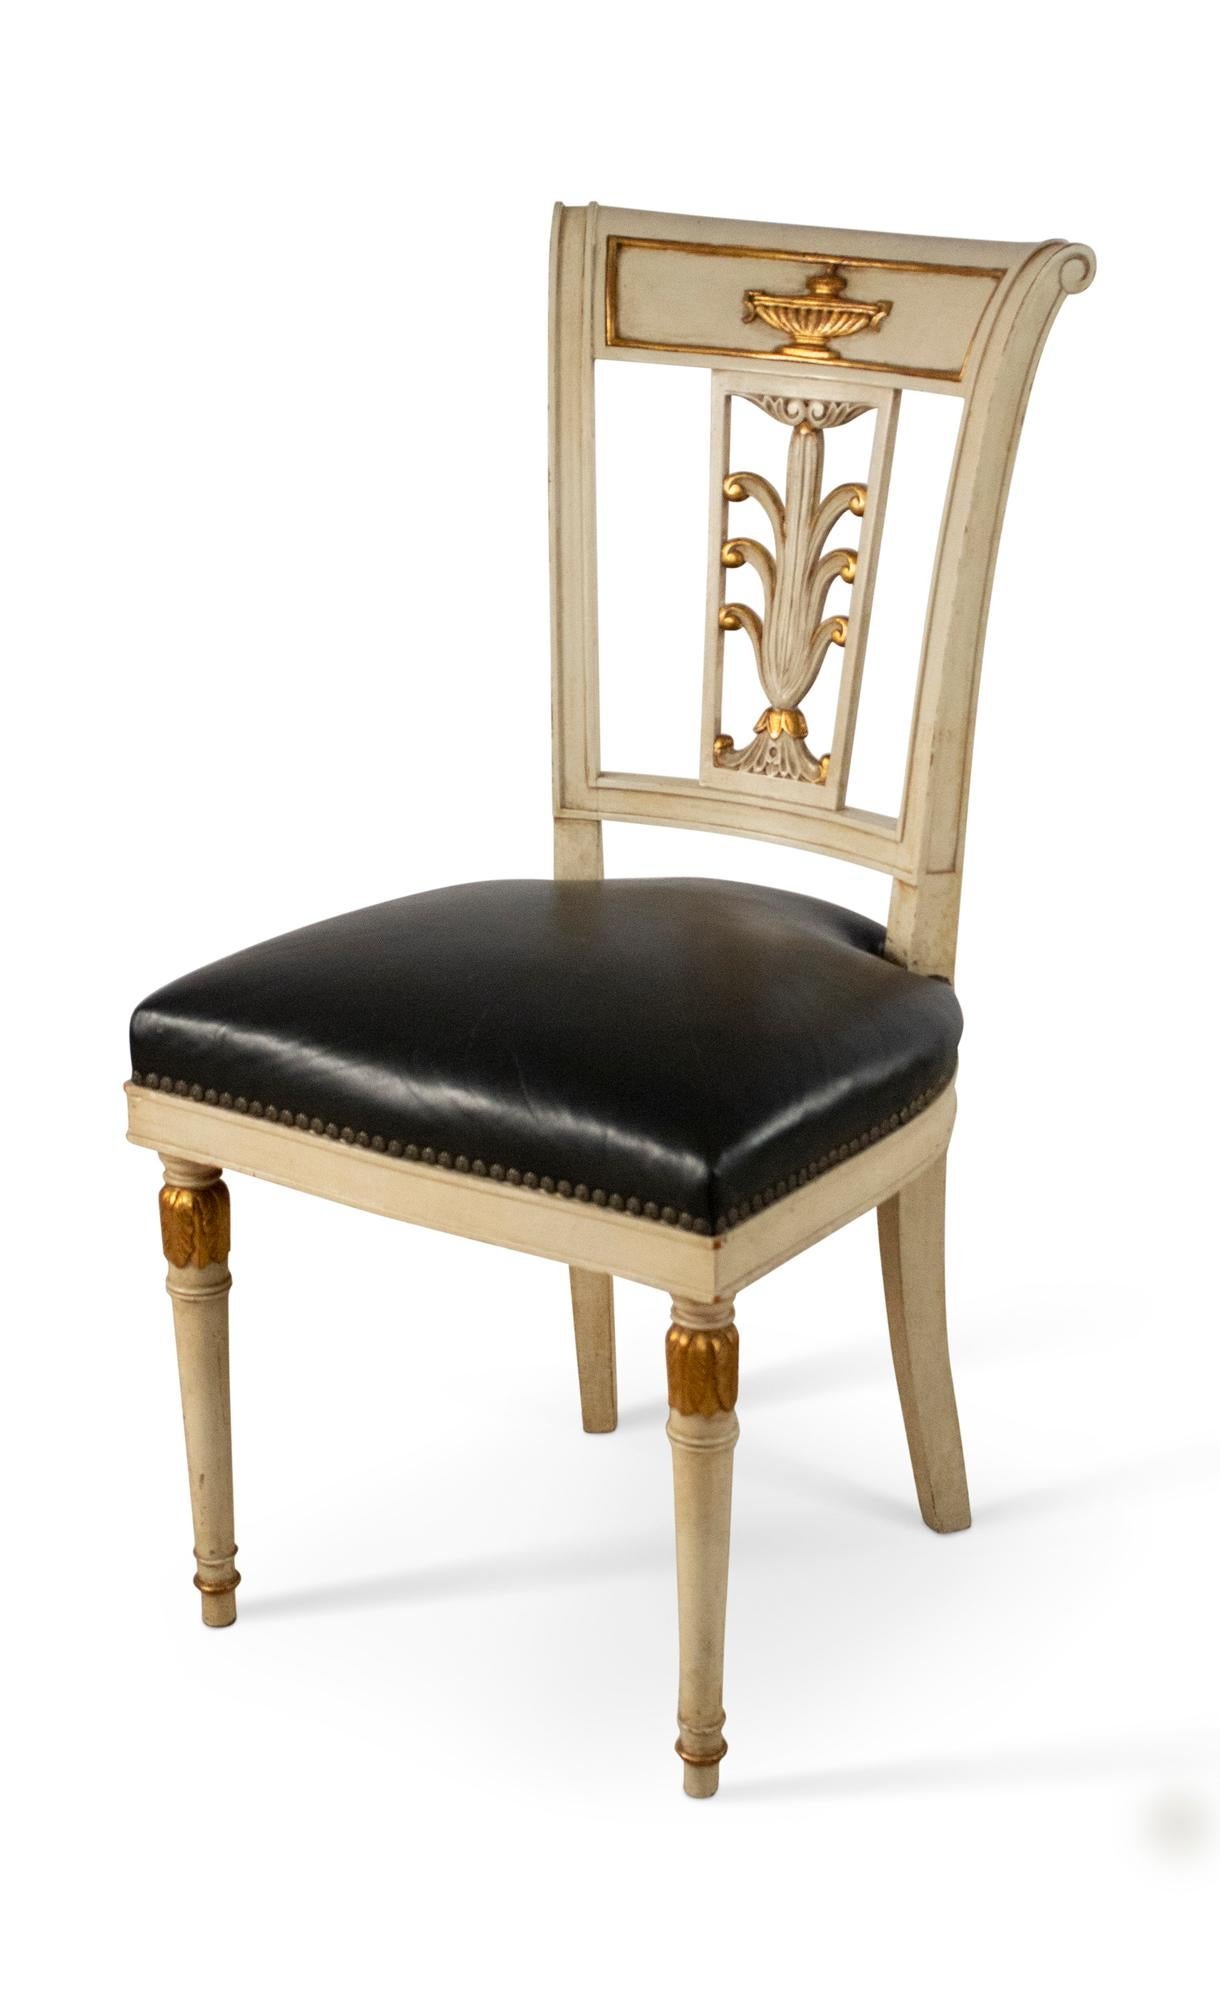 Set of 4 French Directoire-style (mid-20th Century) side chairs with ivory painted and gilt wood frames, giltwood urn and plume design open carved backs, and black leather slip seats. (JANSEN) (priced as set).
      